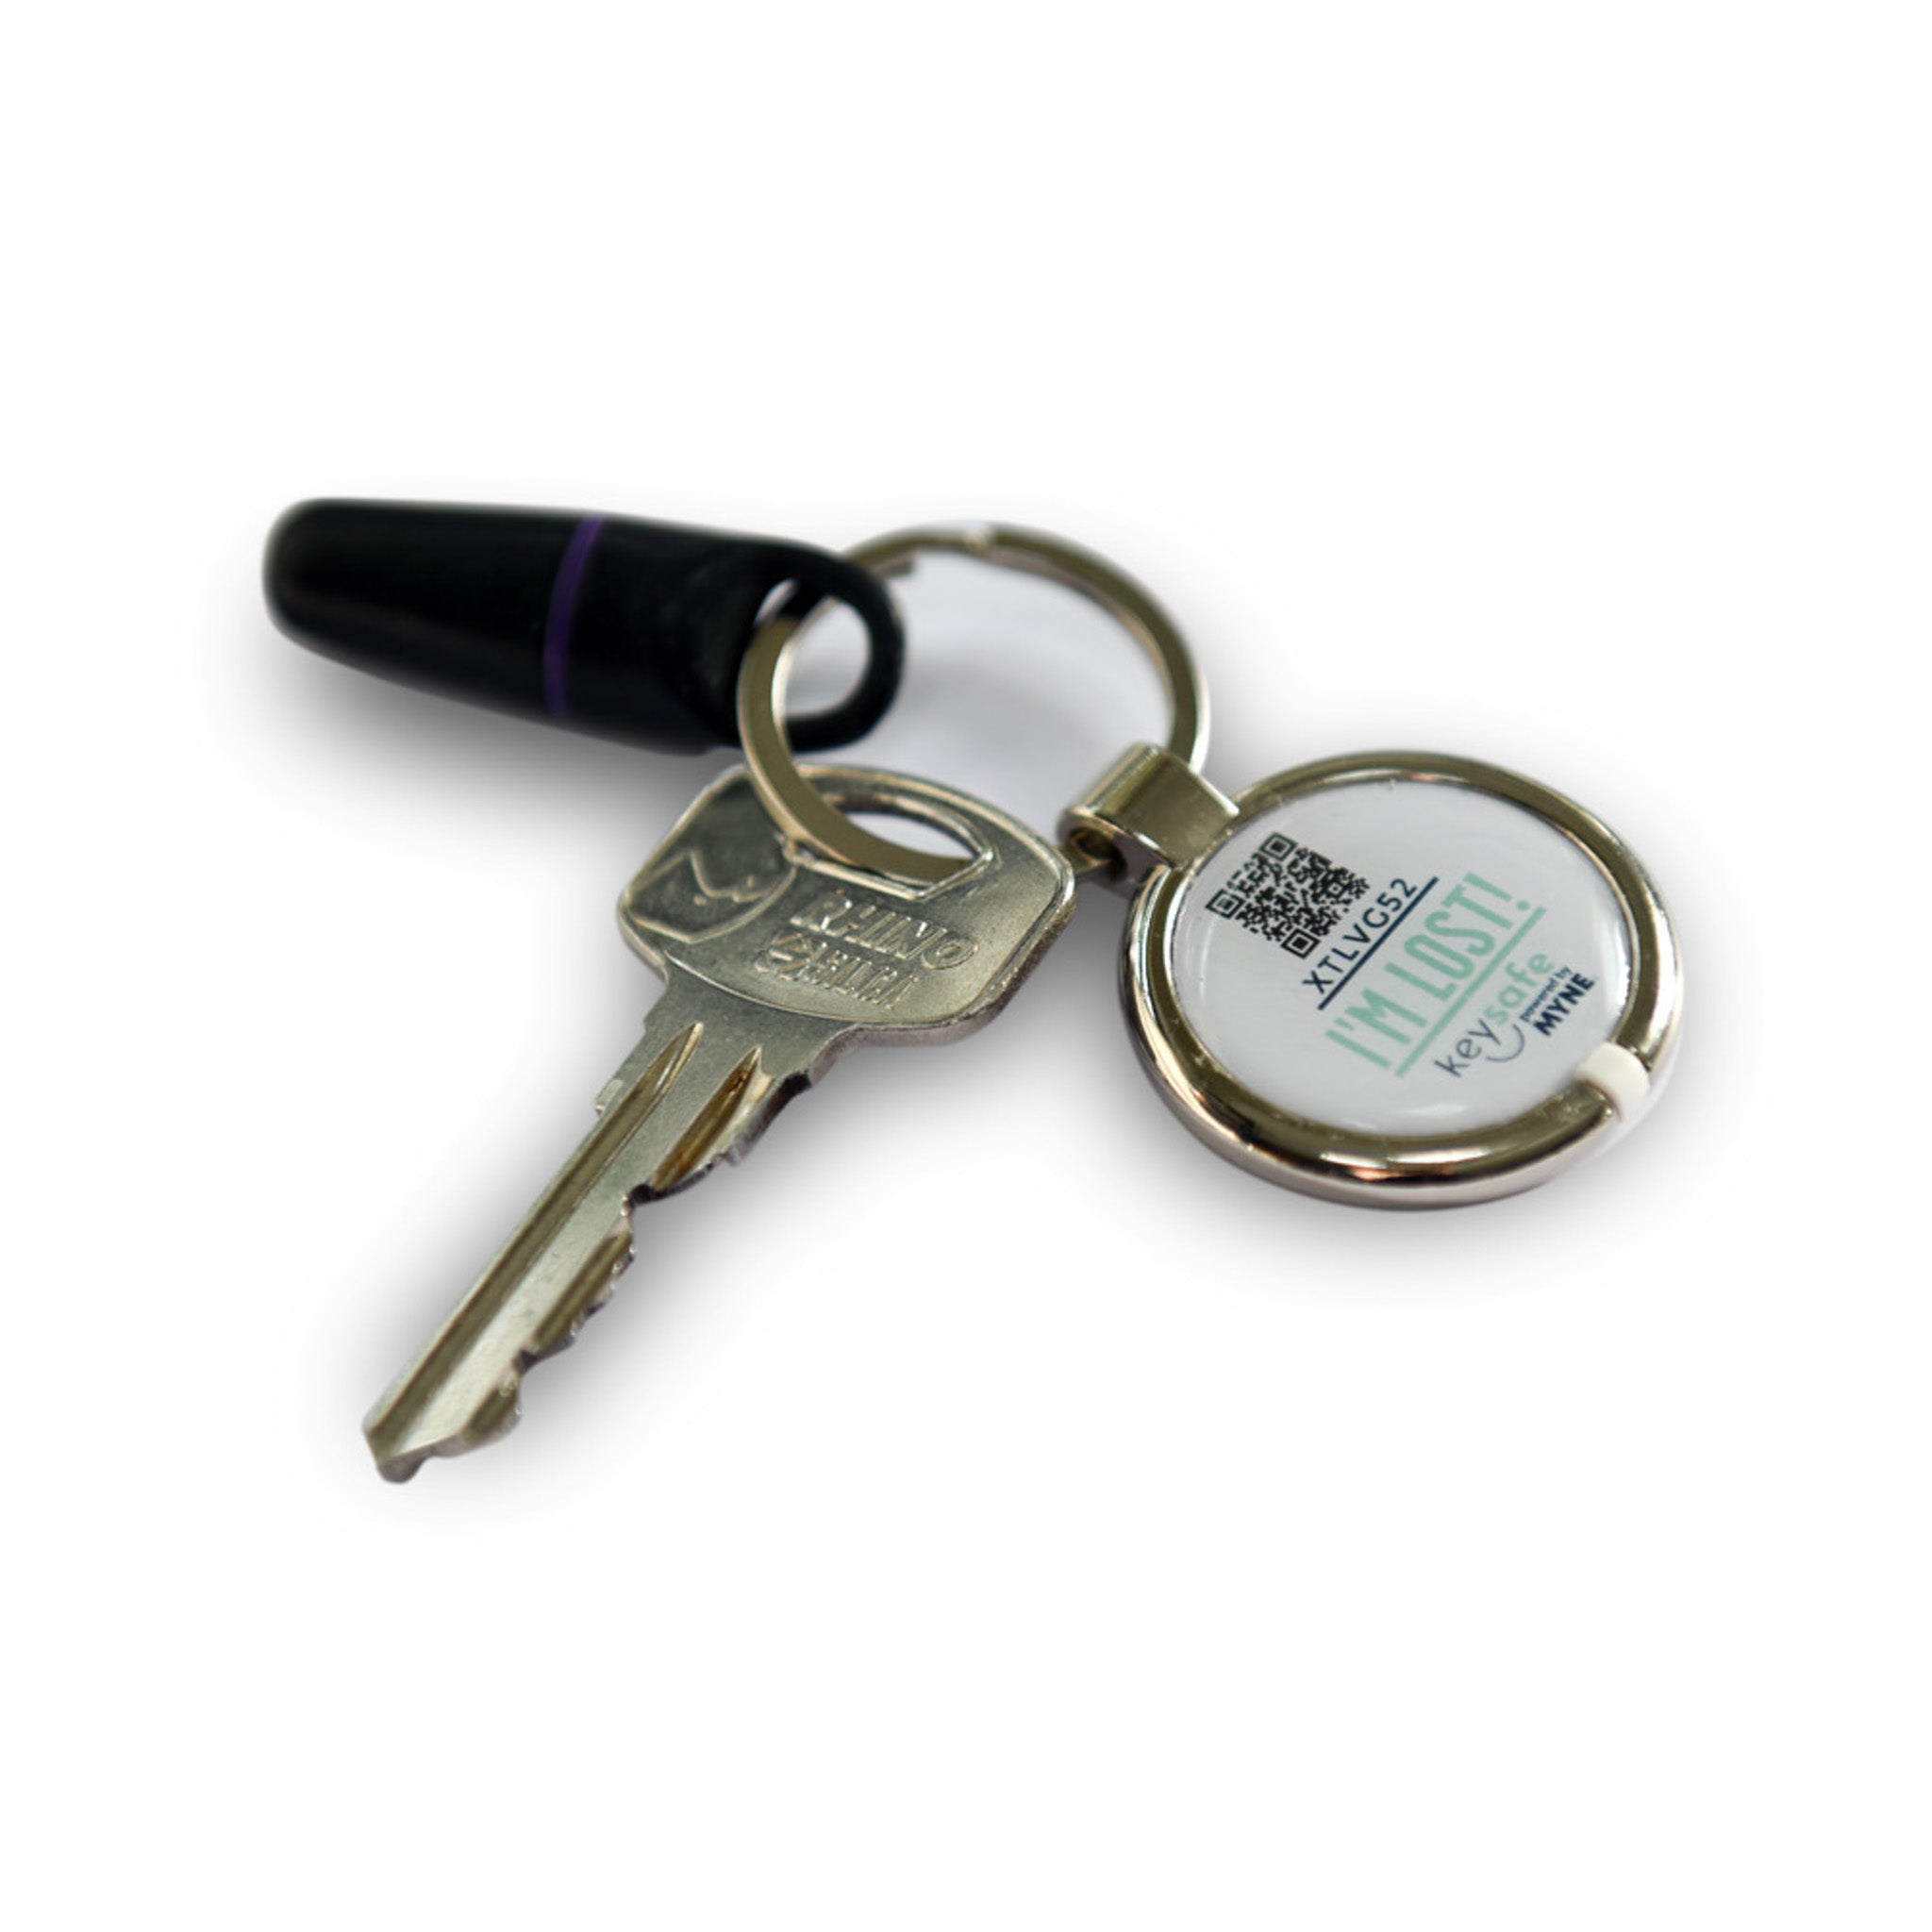 Digital keyring saying 'i'm lost' attached to key and fob 